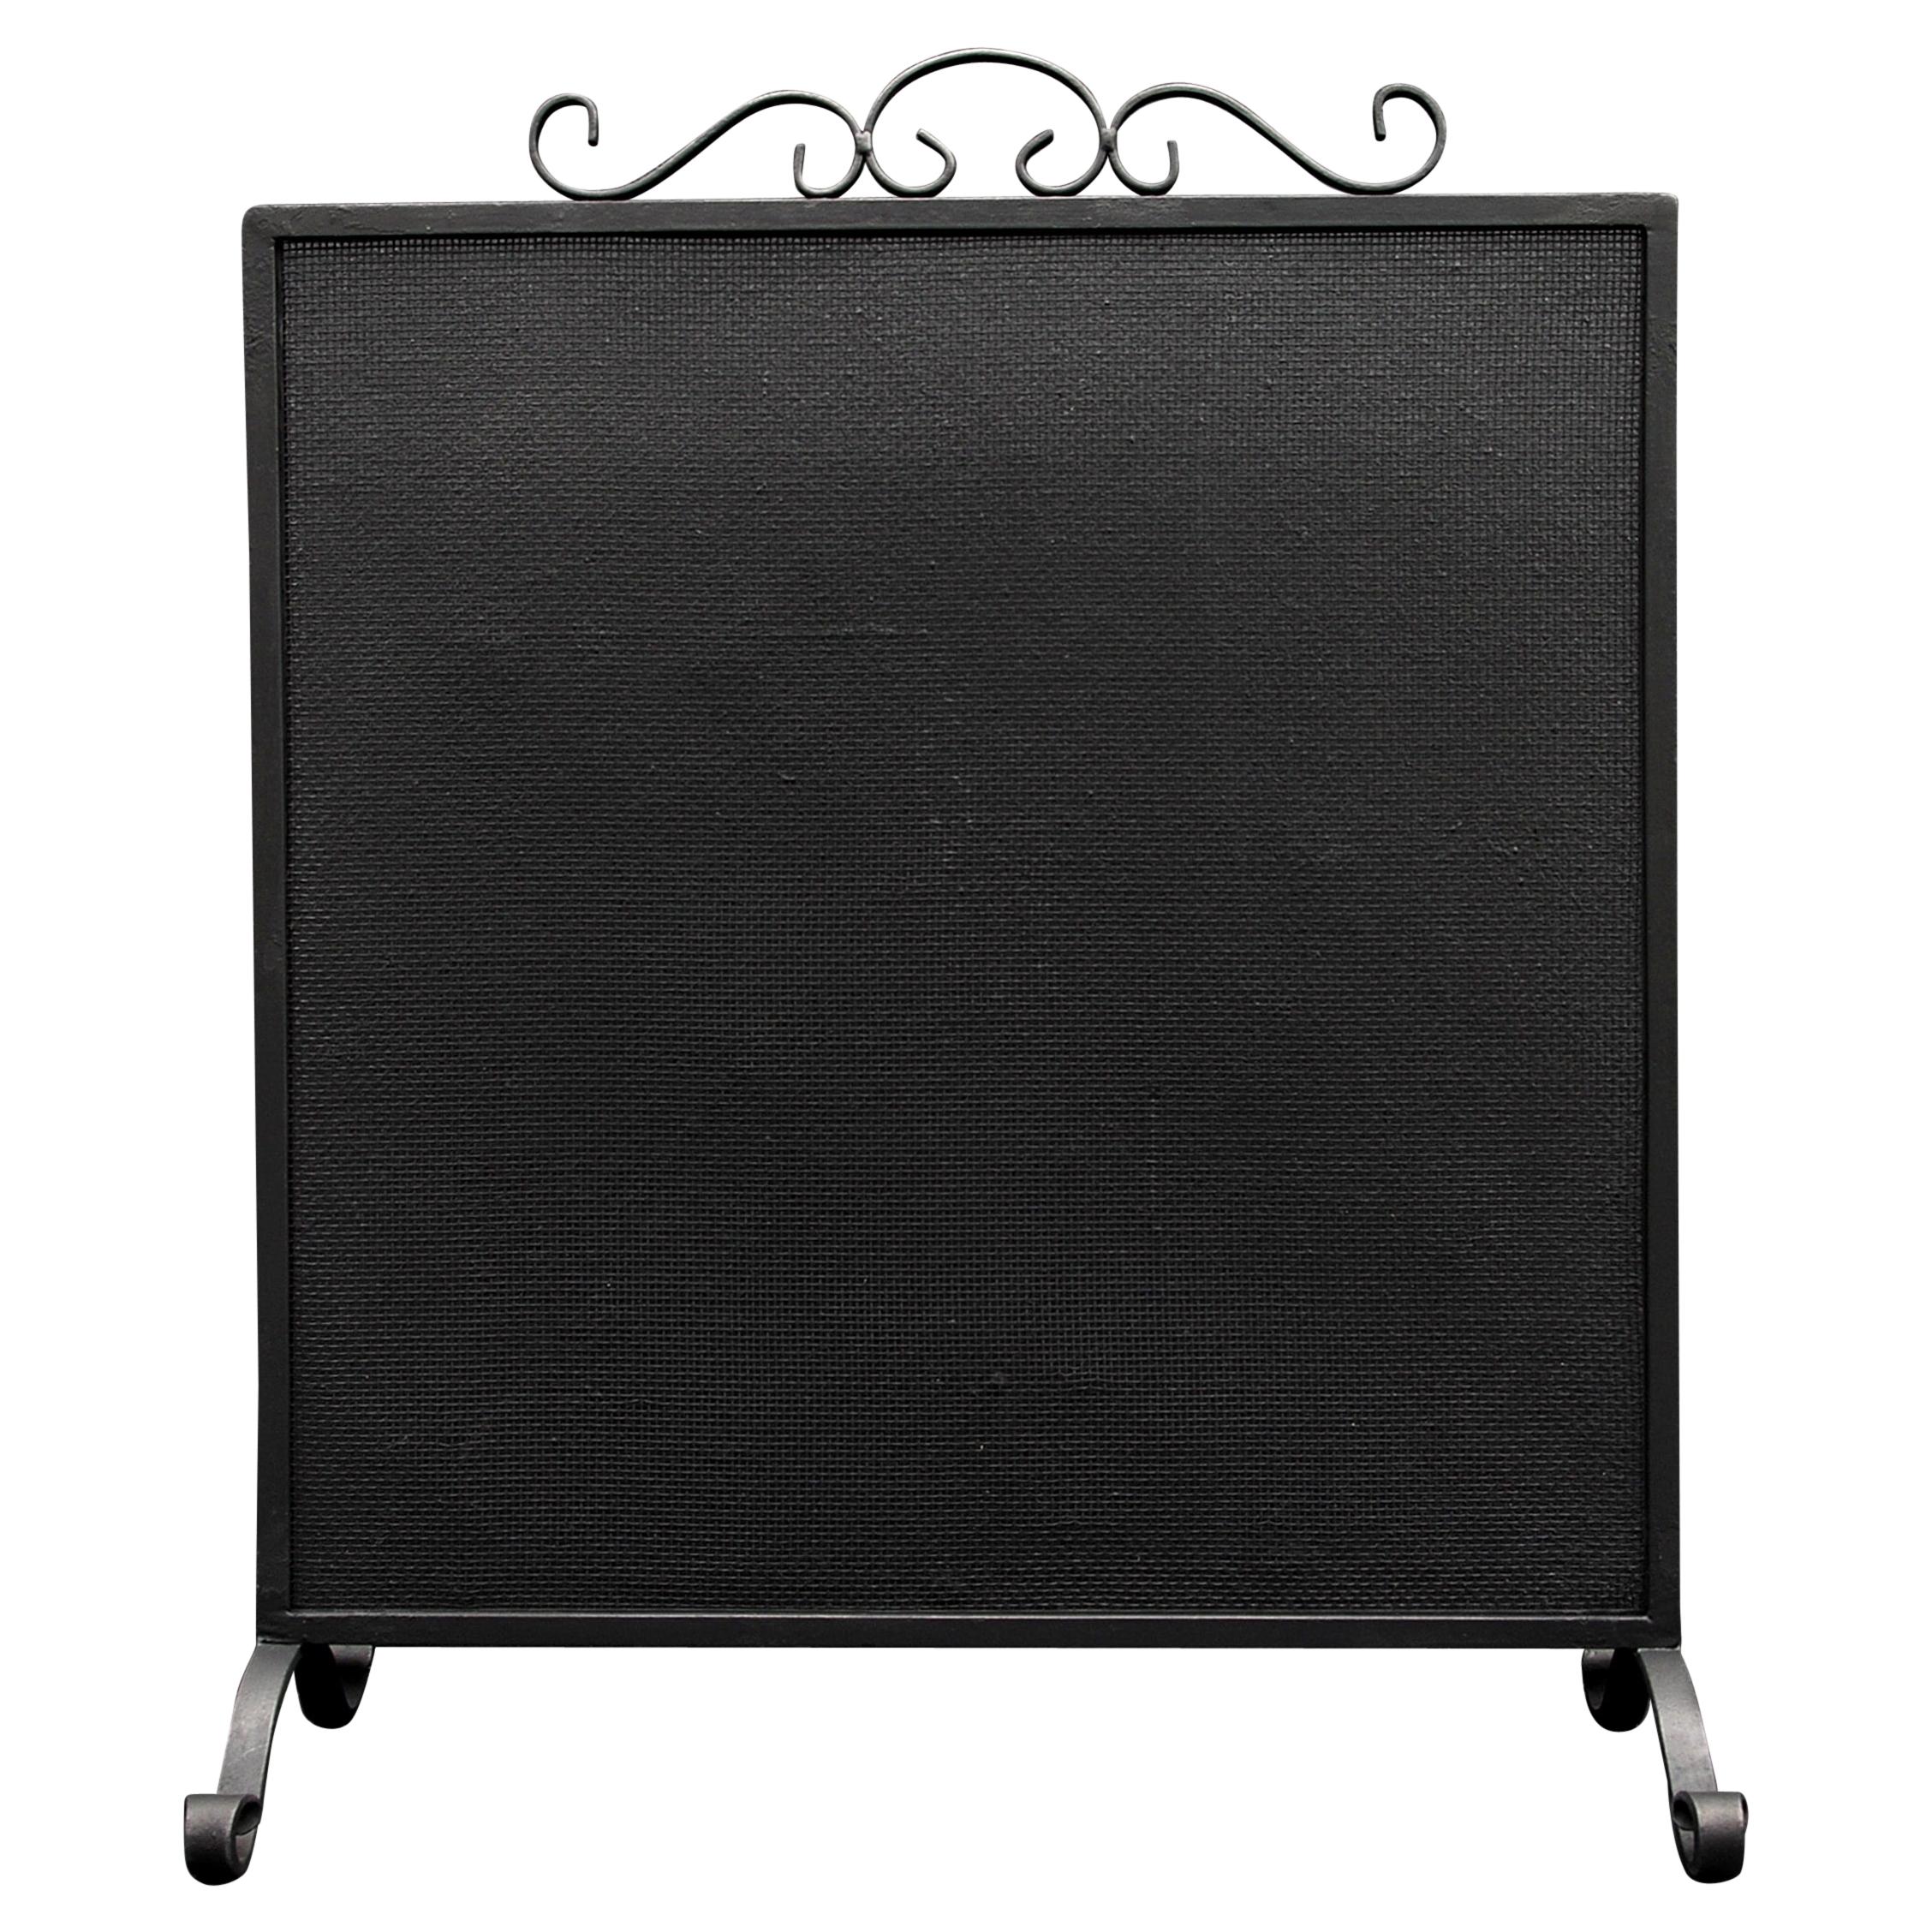 Simple Wrought Iron Fire Screen